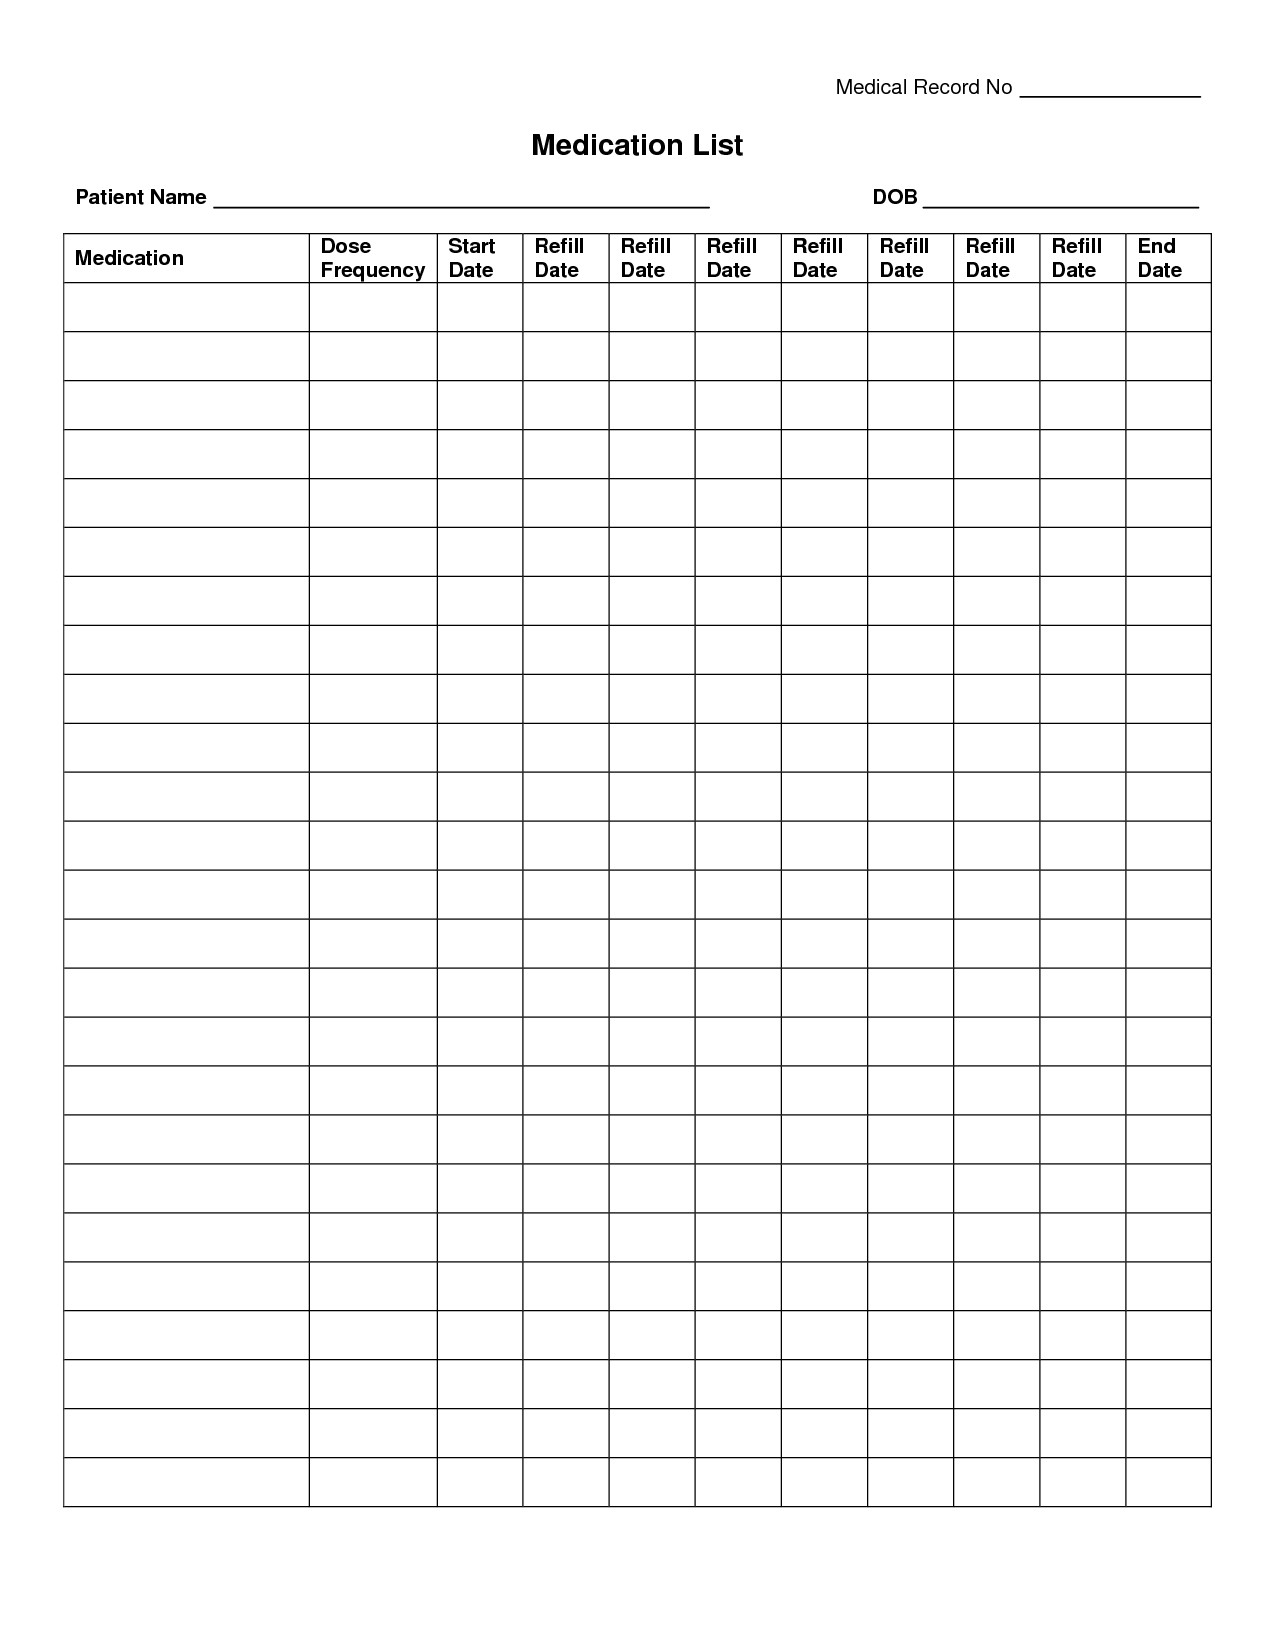 Daily Medication Chart Template Free Medication Administration Record Template Excel